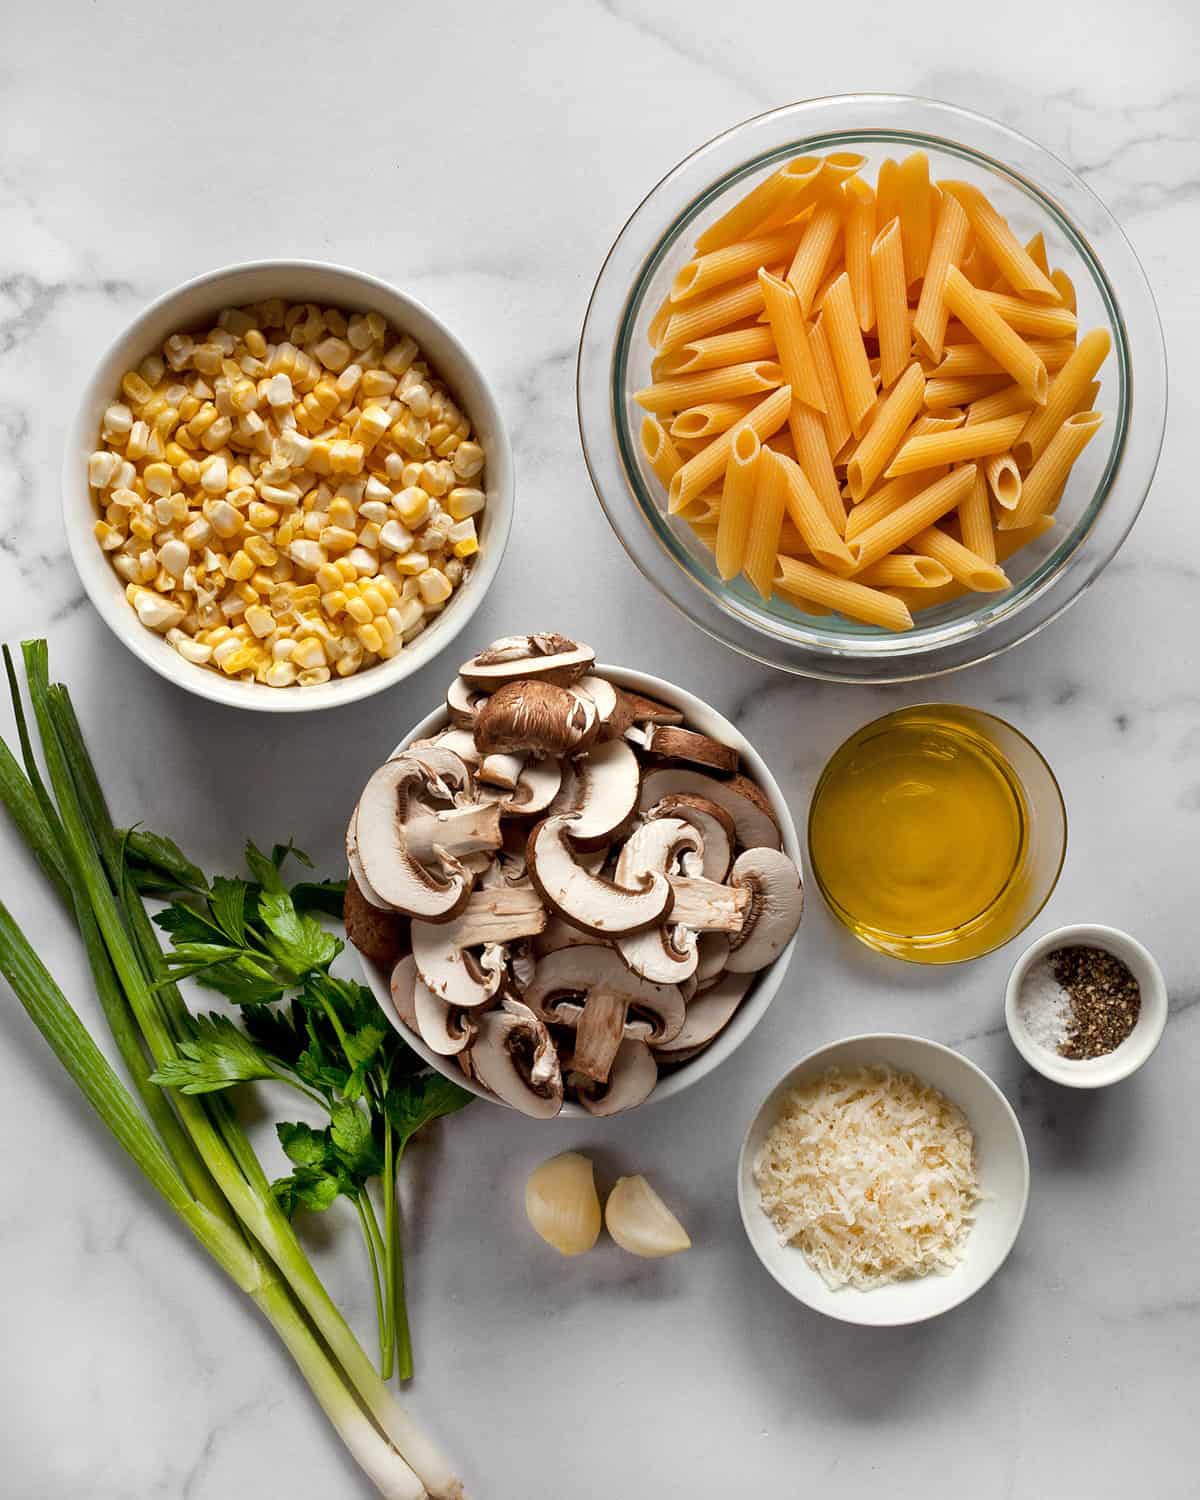 Ingredients including mushrooms, corn, penne, garlic, scallions, parmesan and parsley.